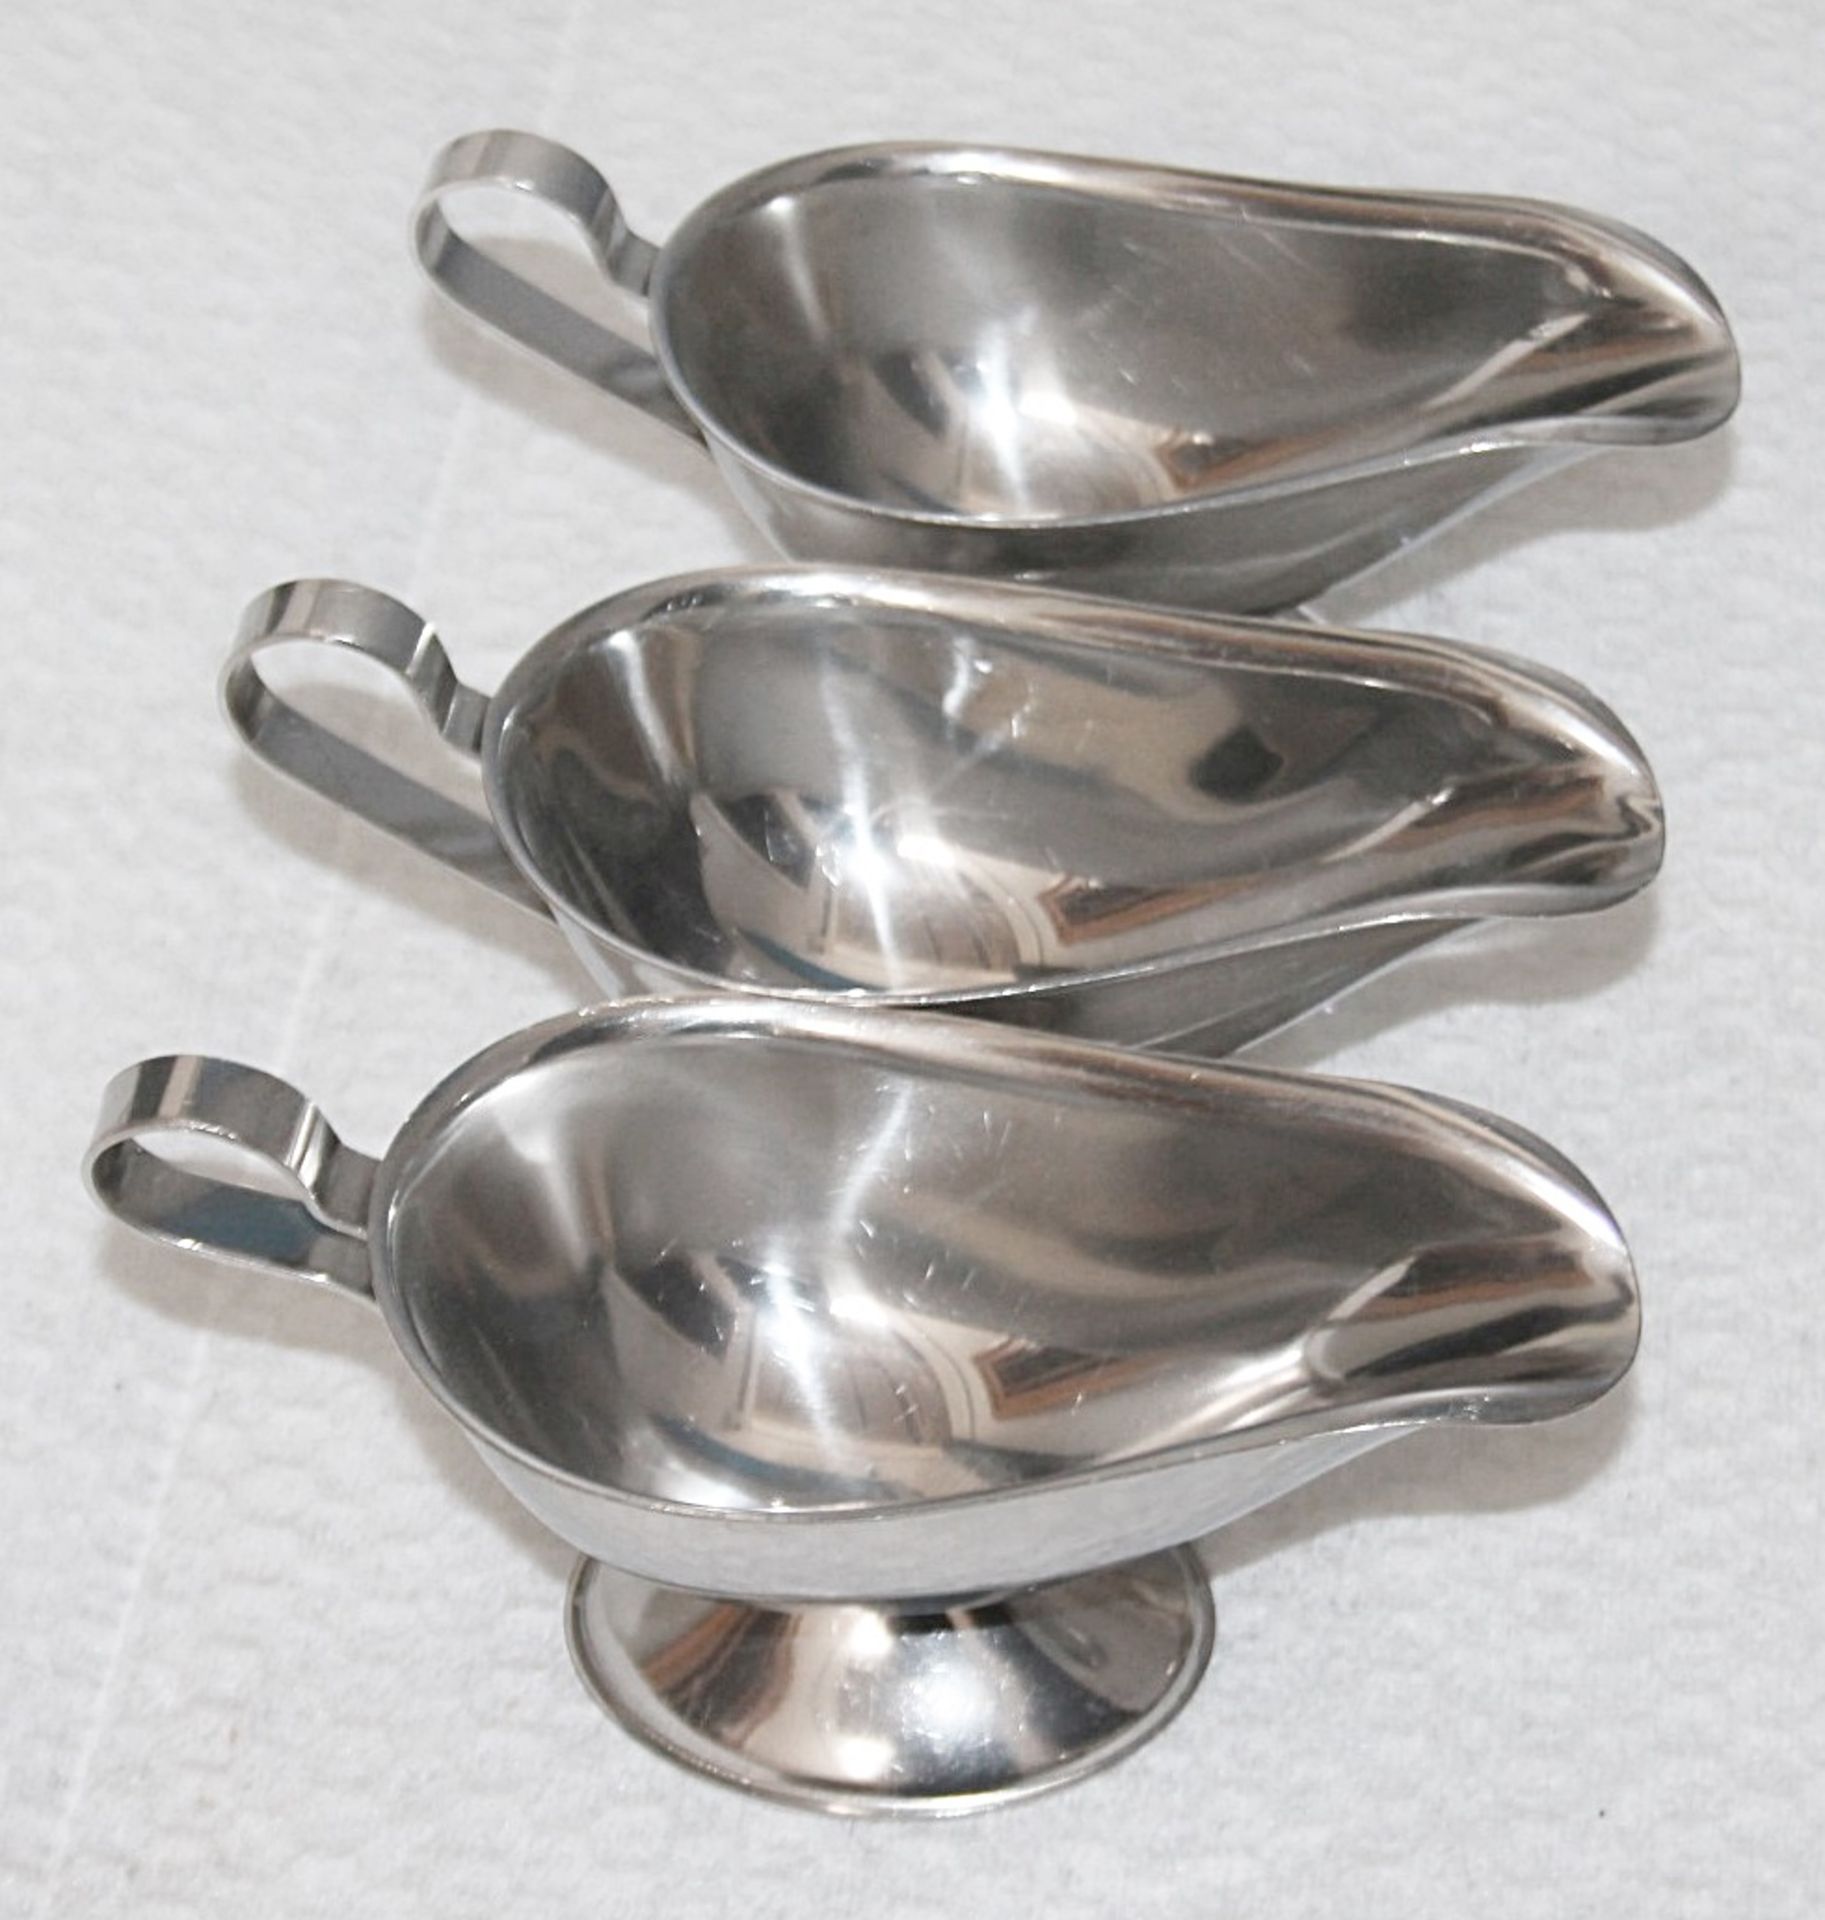 30 x Assorted Silver-Plated Sauce Boats - The Majority Strong and Woodhatch Branded - Recently - Image 7 of 8